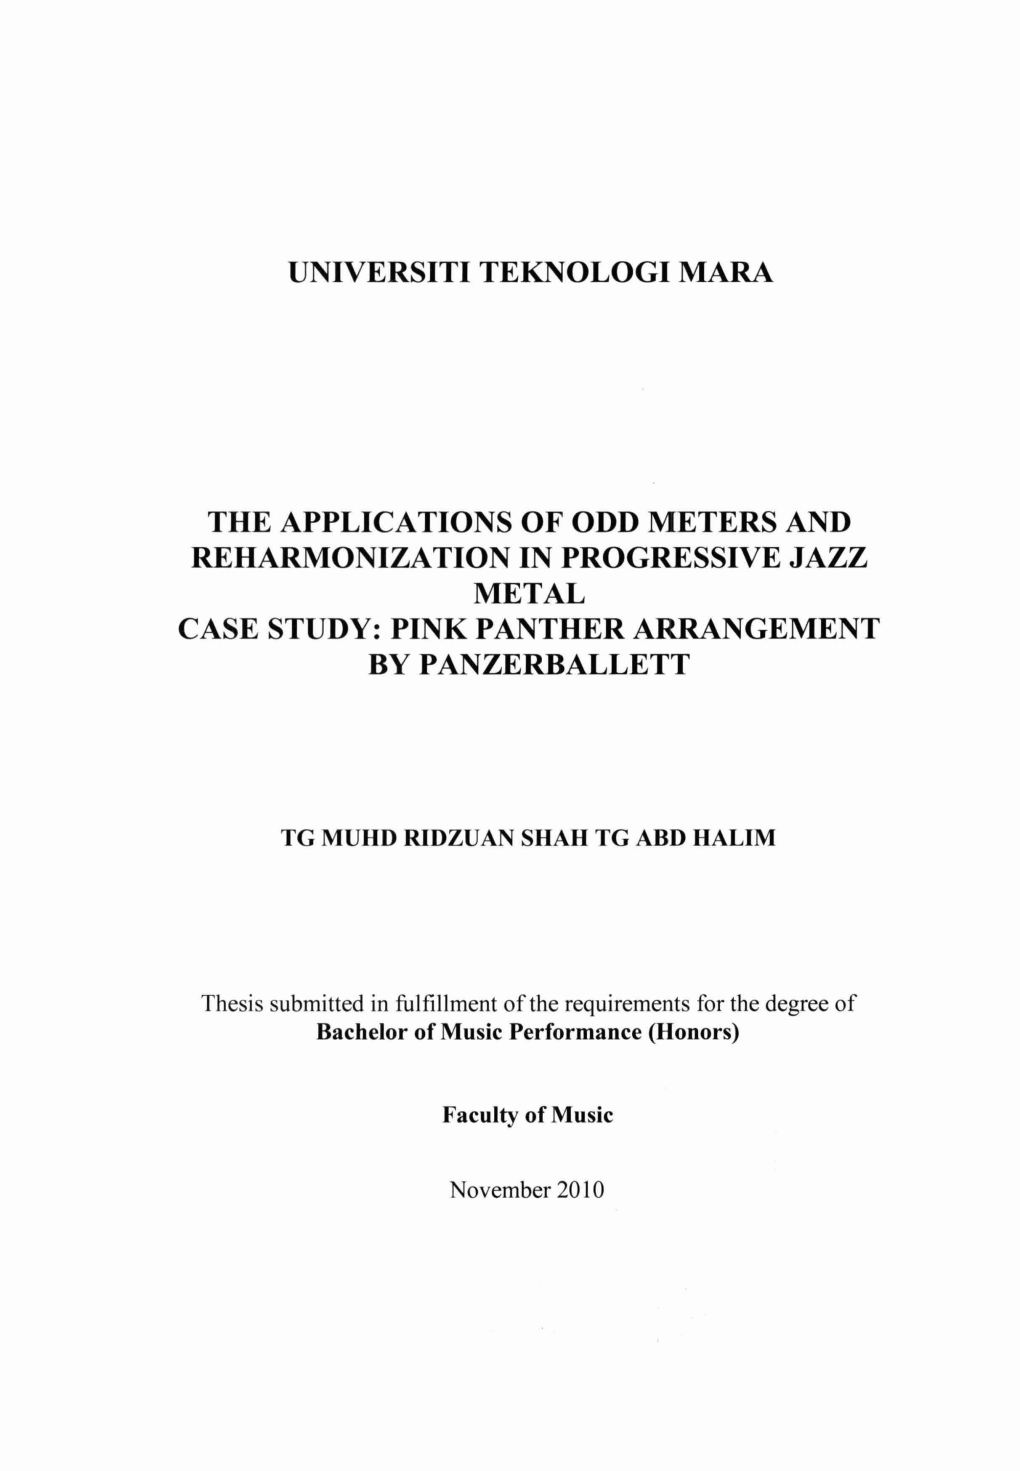 The Applications of Odd Meters and Reharmonization in Progressive Jazz Metal Case Study: Pink Panther Arrangement Bypanzerballett